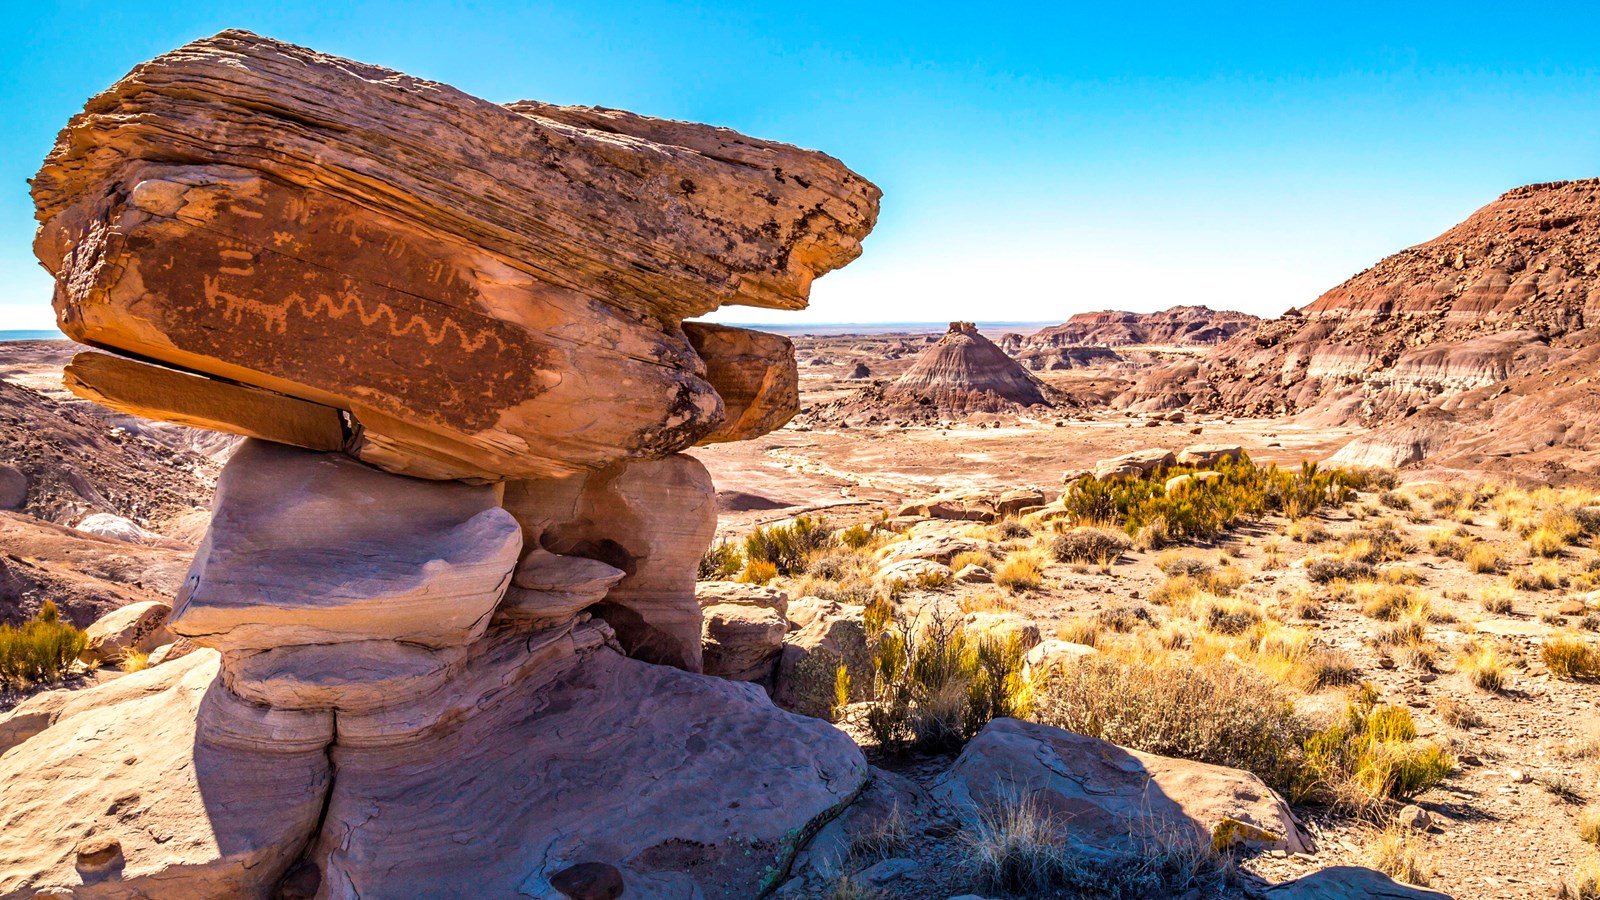 Rocks—some with petroglyphs—pile up throughout the scenic view with buttes and mesas under a blue sk